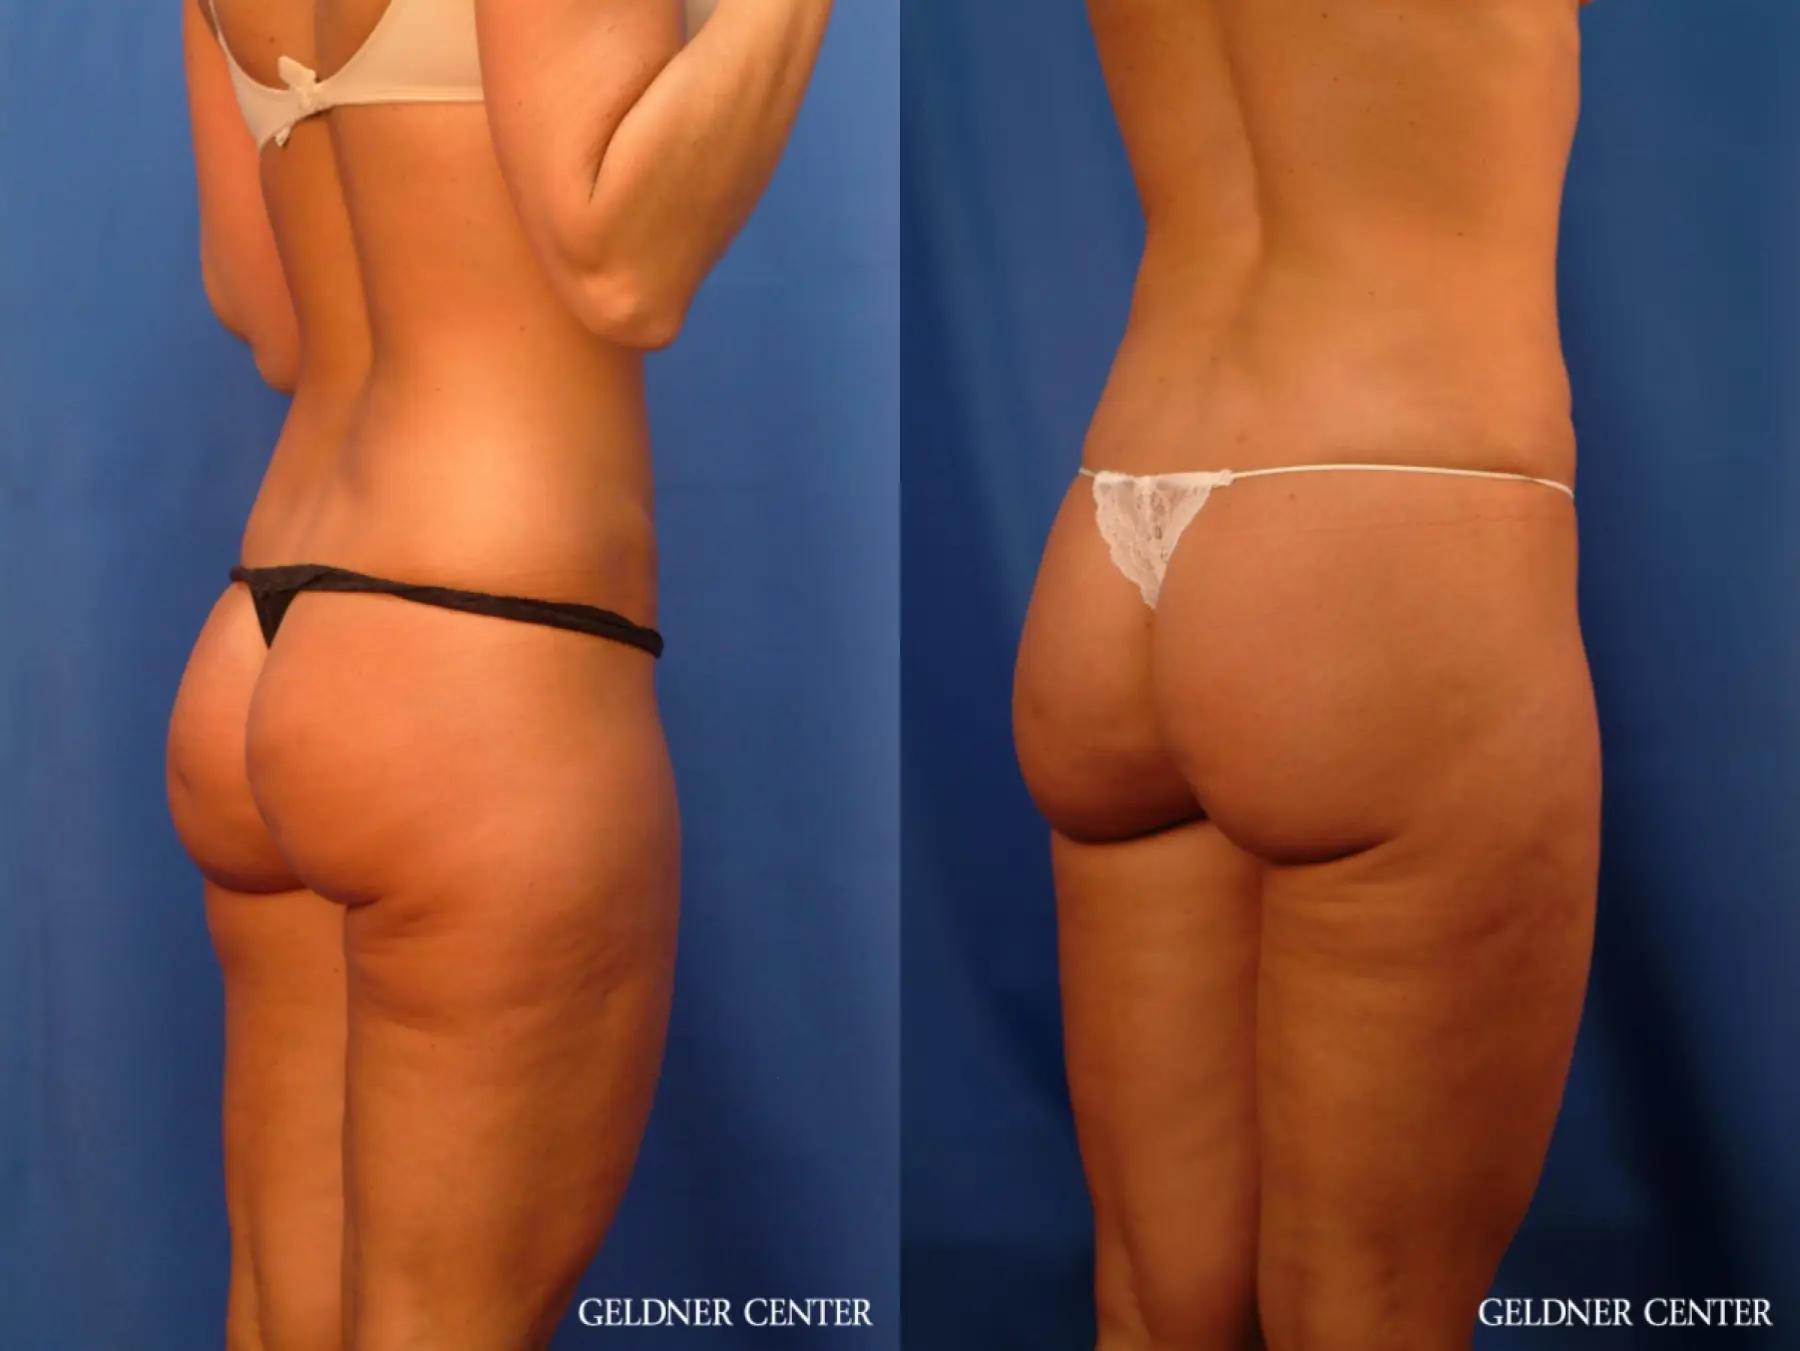 Vaser lipo patient 2624 before and after photos - Before and After 3